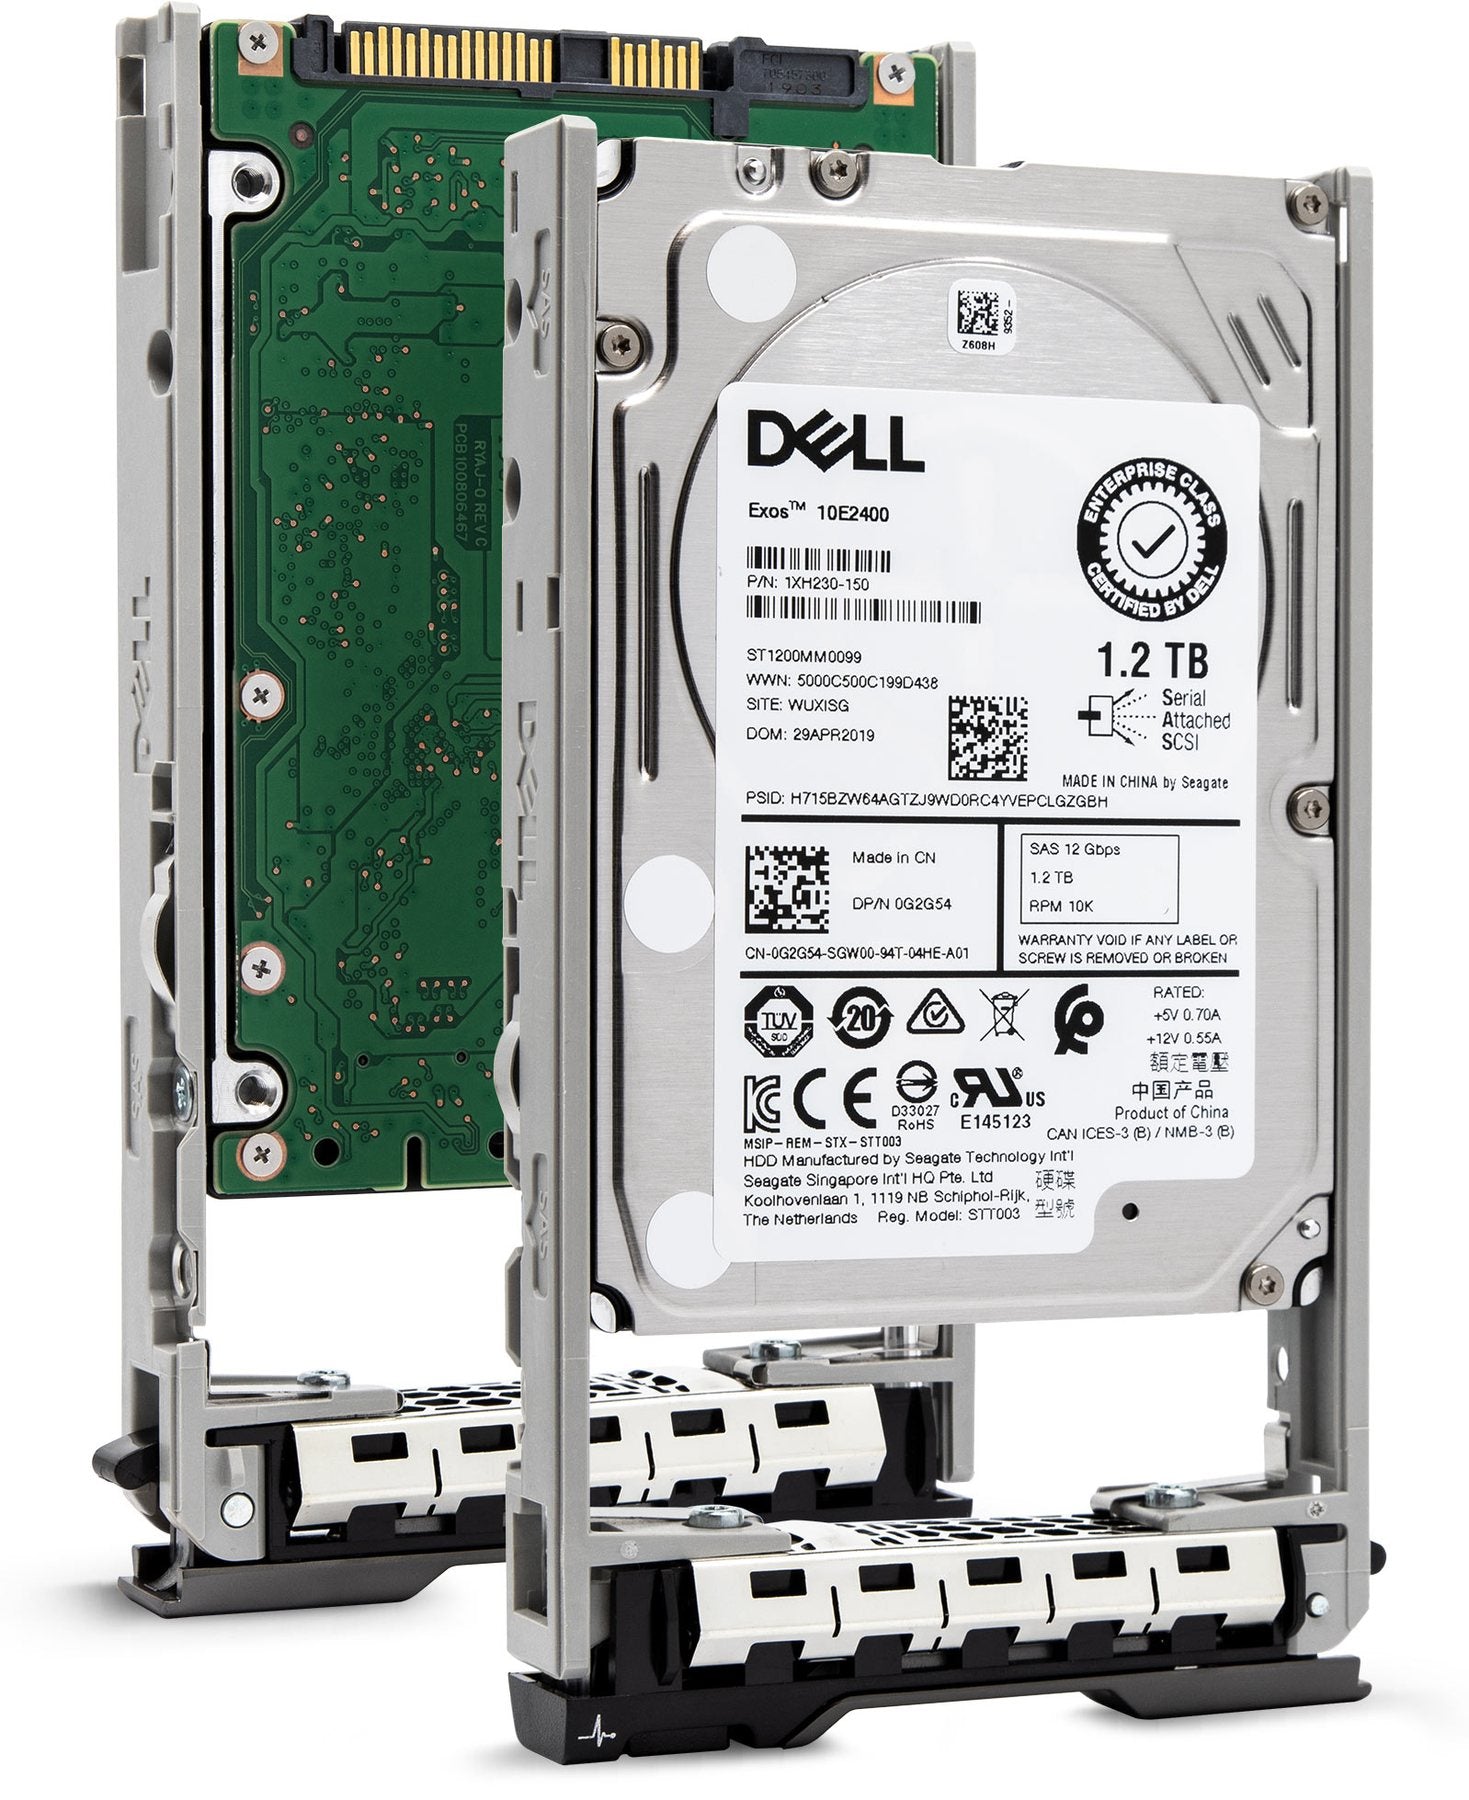 Dell G13 0GT7MJ 1.2TB 10K RPM SAS 12Gb/s 512n 2.5" Manufacturer Recertified HDD